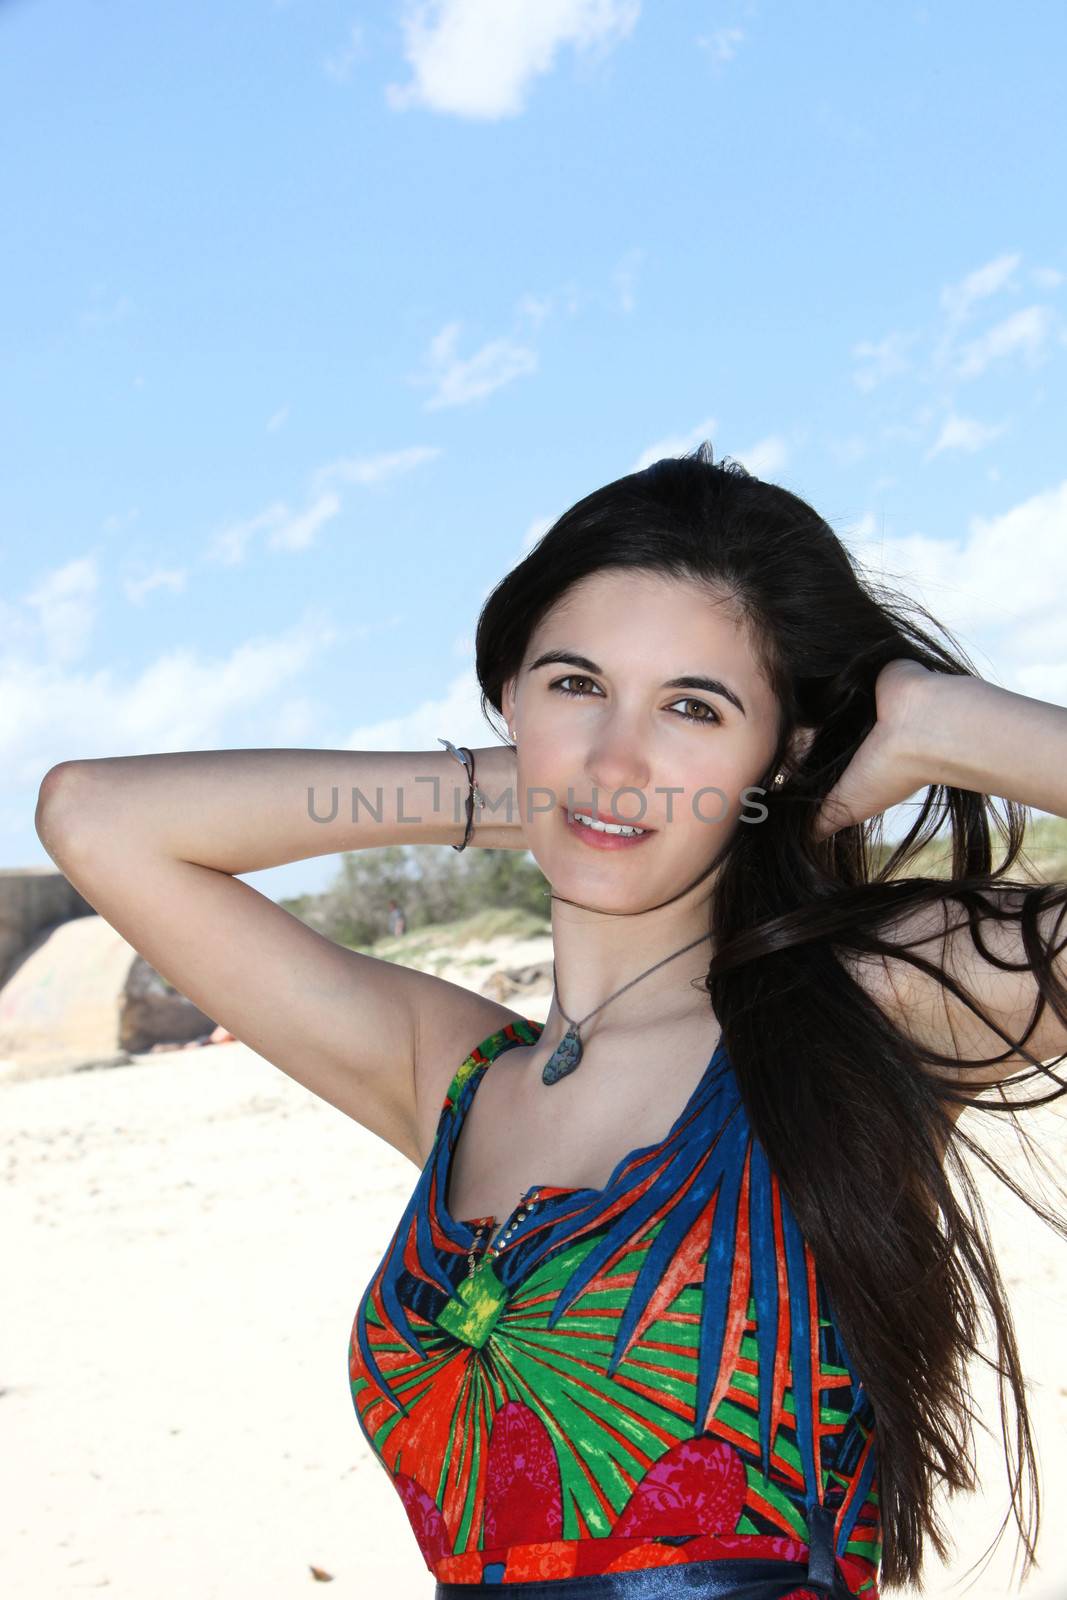 Beautiful woman on a summer vacation at the beach posing with her hands raised behind her neck in her long straight brunette hair wearing a colourful summer dress